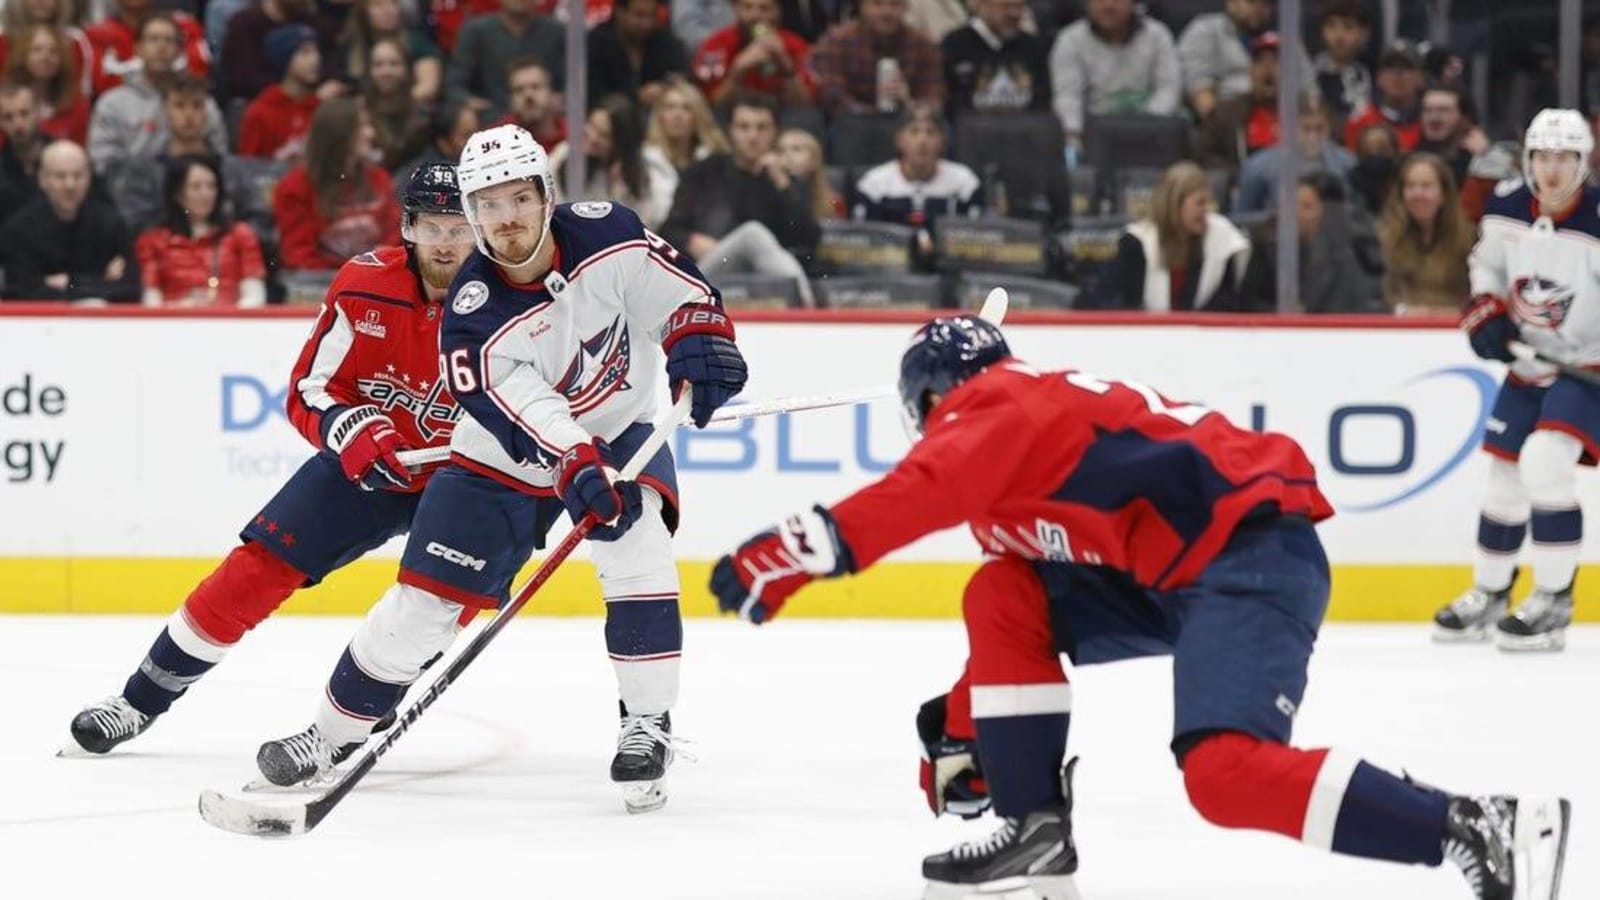 Early goals stand up as Caps clip Blue Jackets